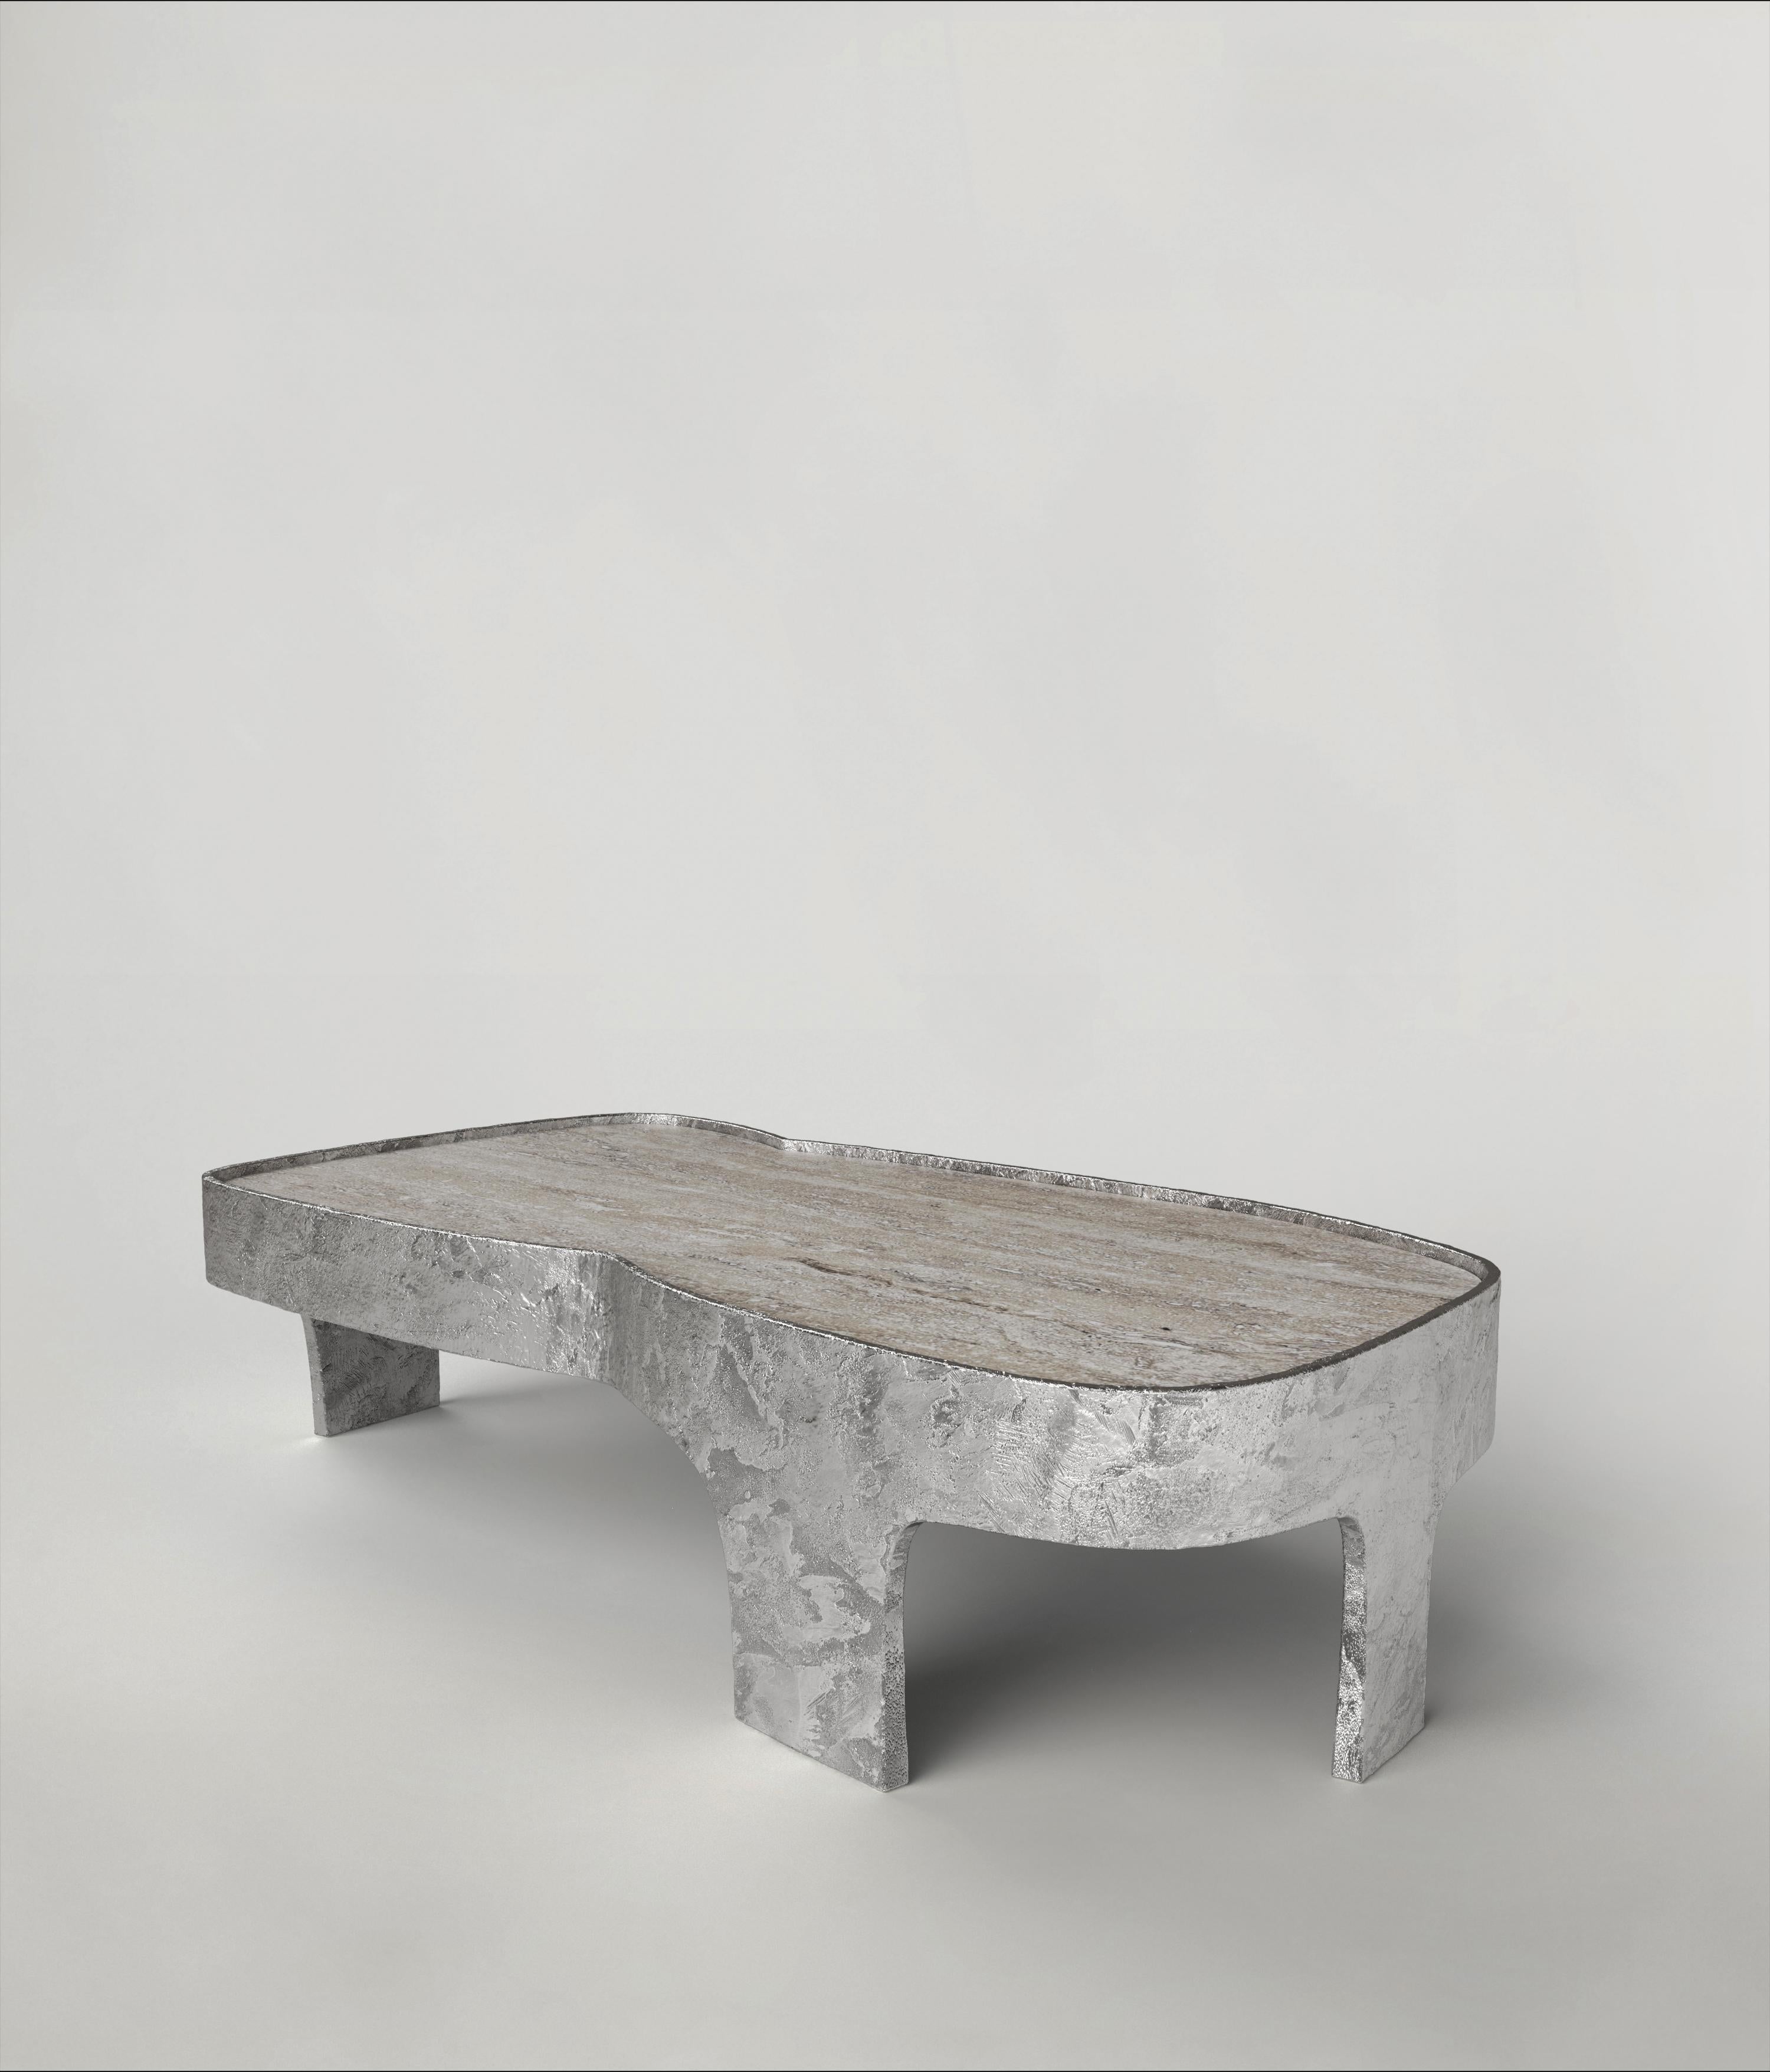 Sumatra V3 low table by Edizione Limitata
Limited Edition of 15 + 3 pieces. Signed and numbered.
Dimensions: D120 x W60 x H30 cm
Materials: Aluminum+ Travertine

Sumatra is a 21st Century collection of tables made by Italian artisans in aluminium